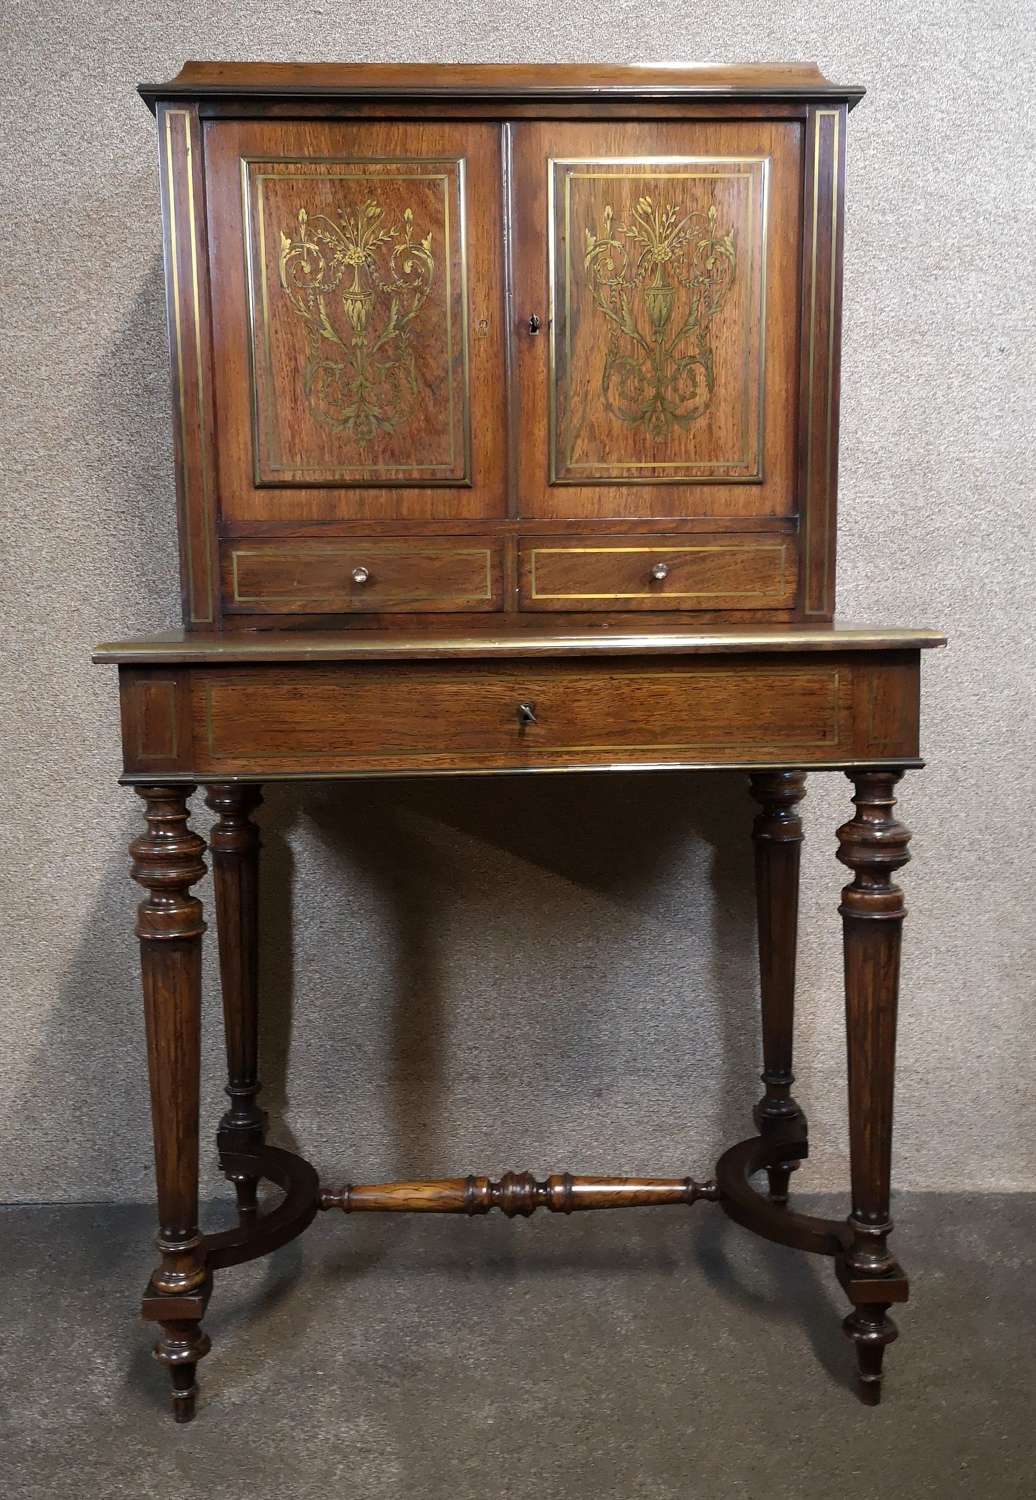 19th Century French Rosewood & Brass Inlaid Bonheur Du Jour